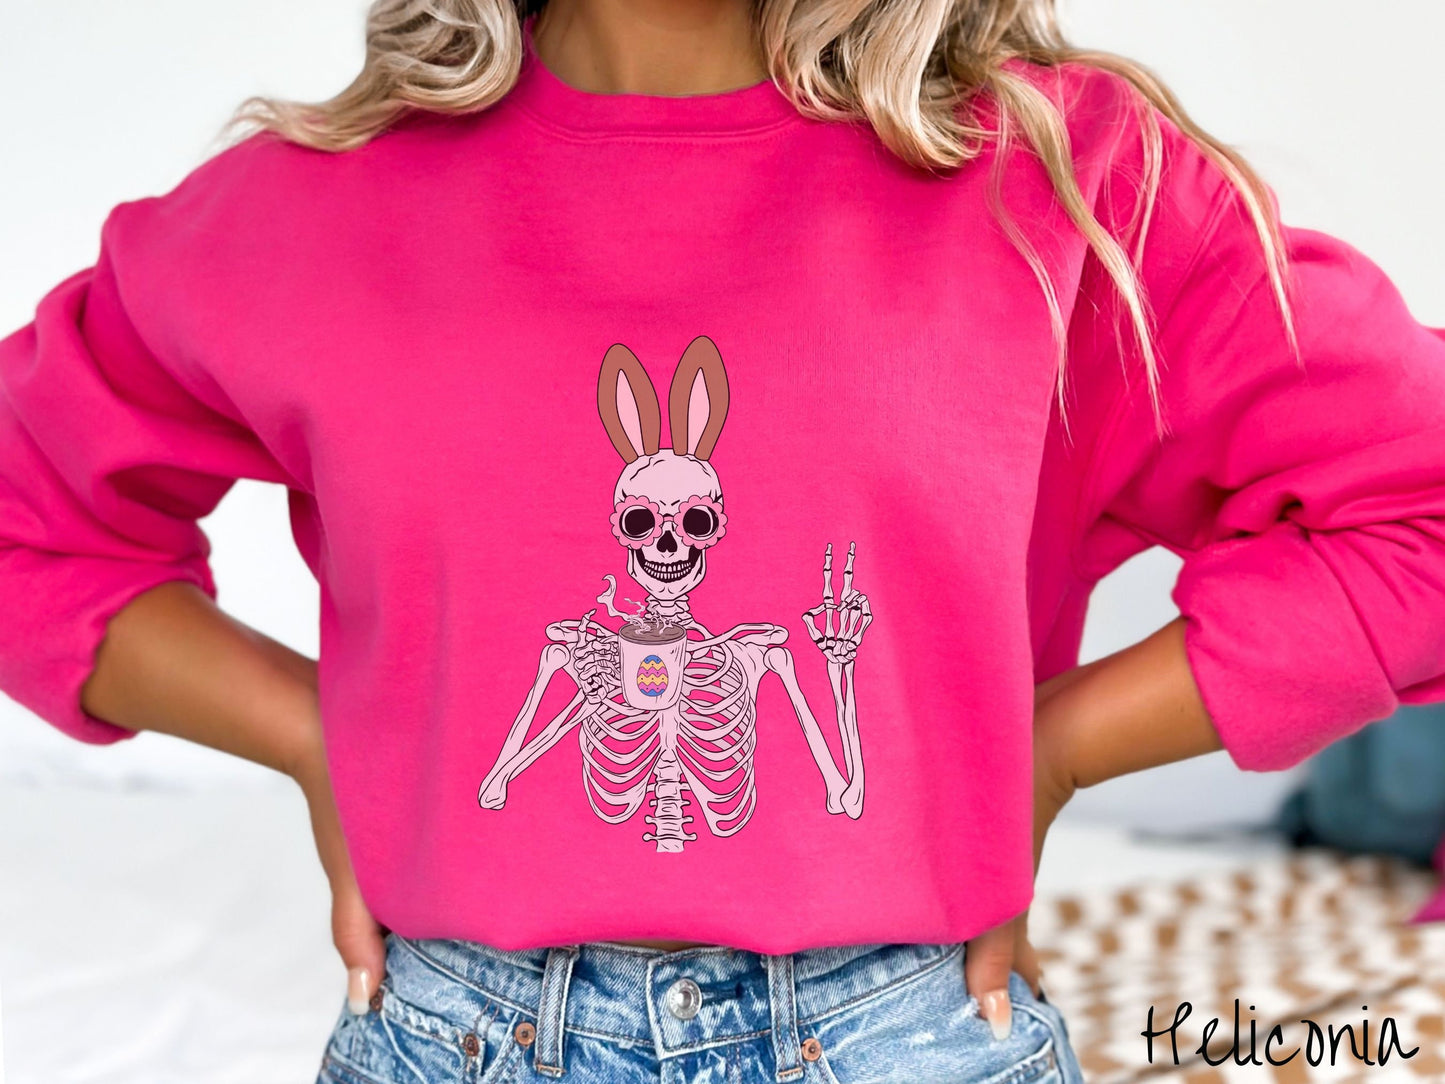 A woman wearing a cute, vintage heliconia colored sweatshirt with a pink-toned skeleton wearing pink glasses and brown bunny ears, holding a cup of coffee and holding up a peace sign with the other hand. The coffee cup has a colorful Easter egg.